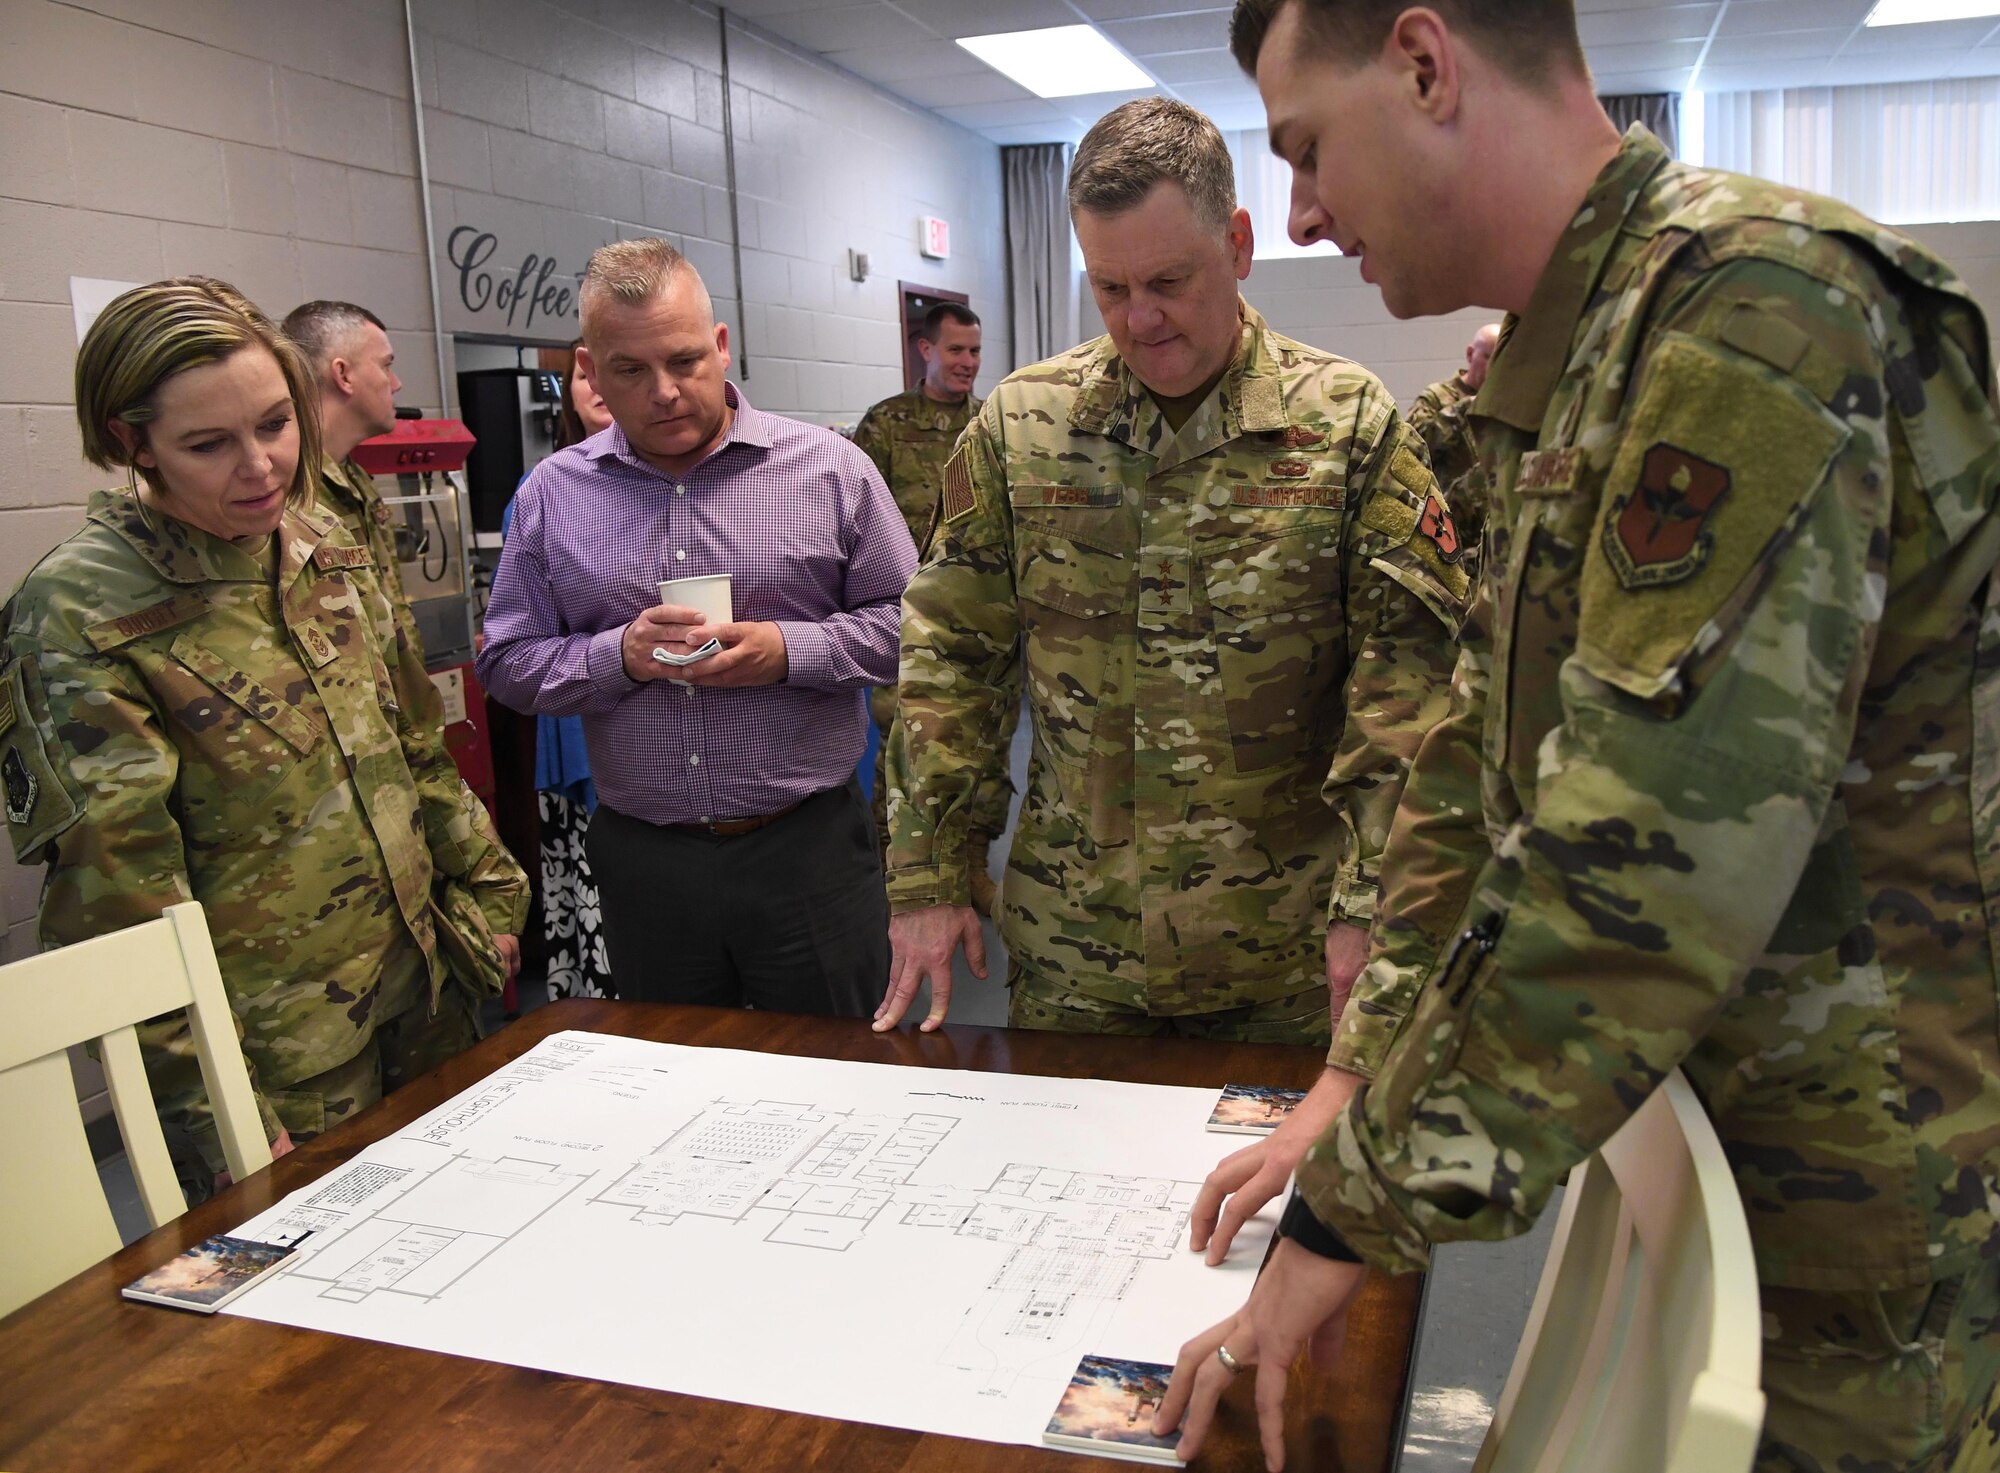 U.S. Air Force Capt. Steven Wichern, 81st Training Wing chaplain, reviews a drawing of The Lighthouse improvements to Lt. Gen. Brad Webb, commander of Air Education and Training Command, and Chief Master Sgt. Julie Gudgel, command chief of AETC, and her husband, Robb Gudgel, during an immersion tour inside the Larcher Chapel at Keesler Air Force Base, Mississippi, Jan. 31, 2020. The AETC command team visited Keesler in order to become more familiar with the mission capabilities of the 81st Training Wing and to view the paradigm shift occurring in the training environment within the 81st Training Group. (U.S. Air Force photo by Kemberly Groue)